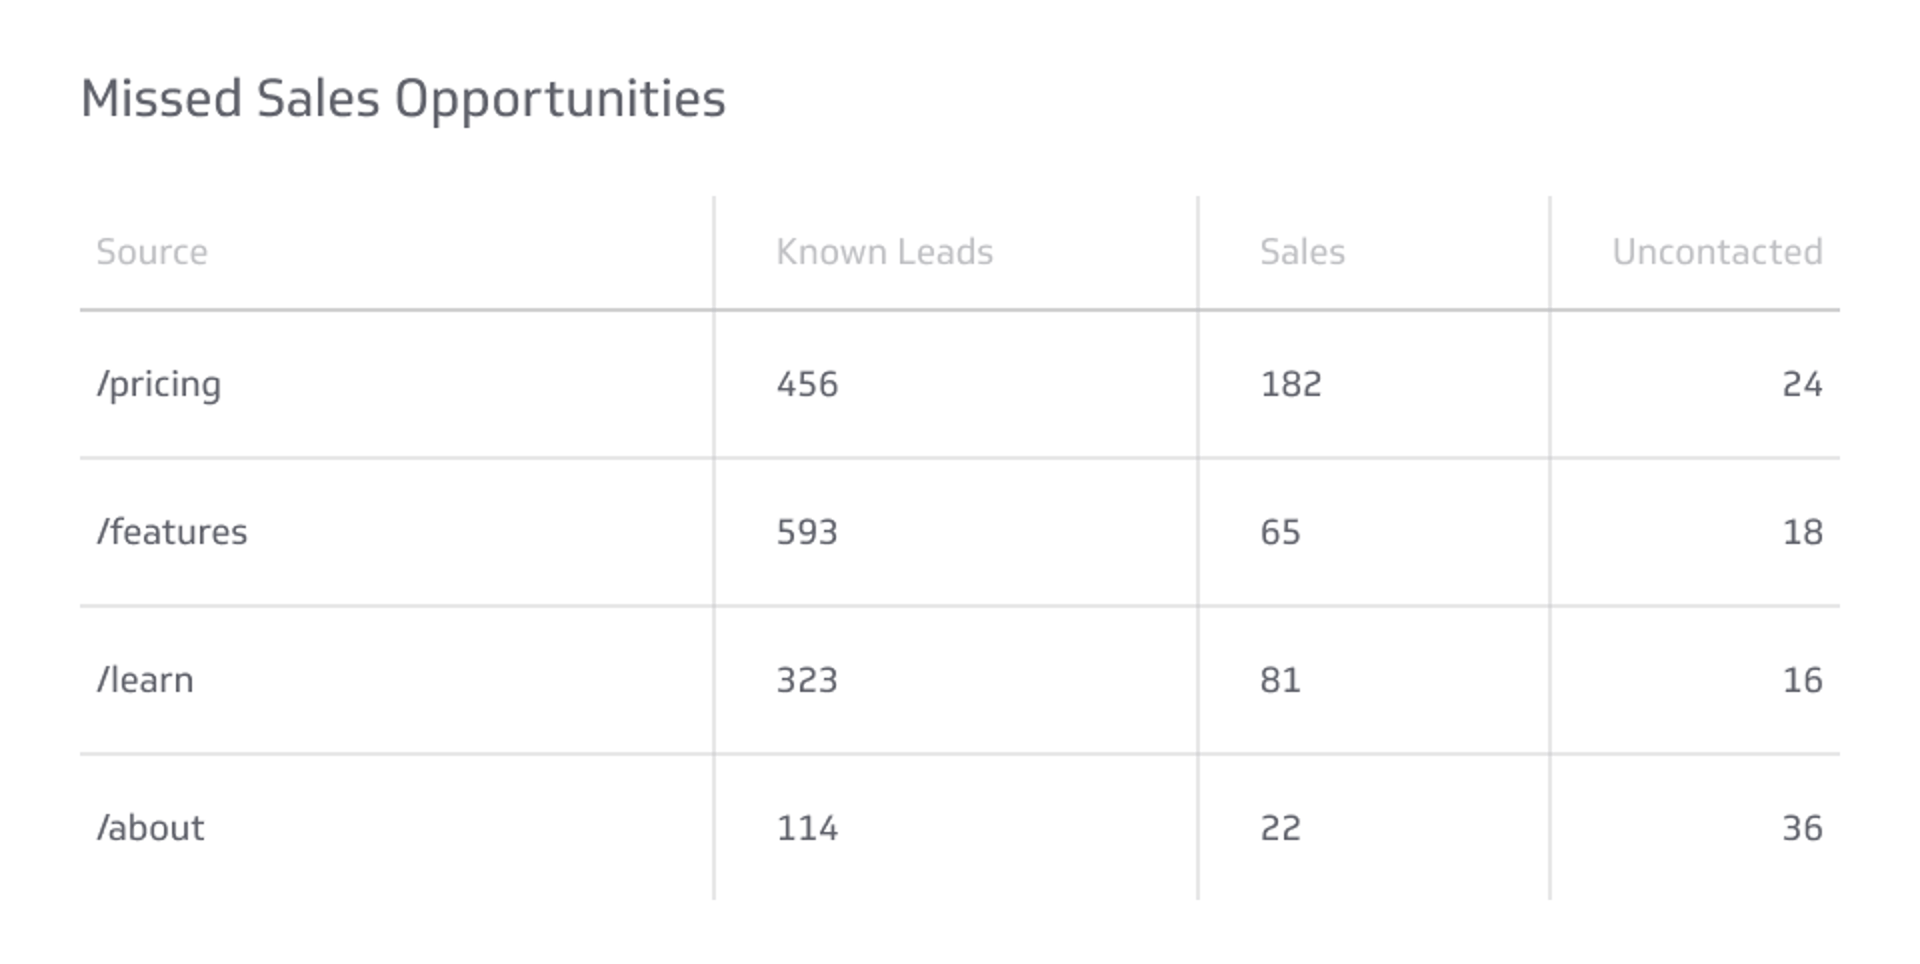 Related KPI Examples - Missed Sales Opportunities Metric